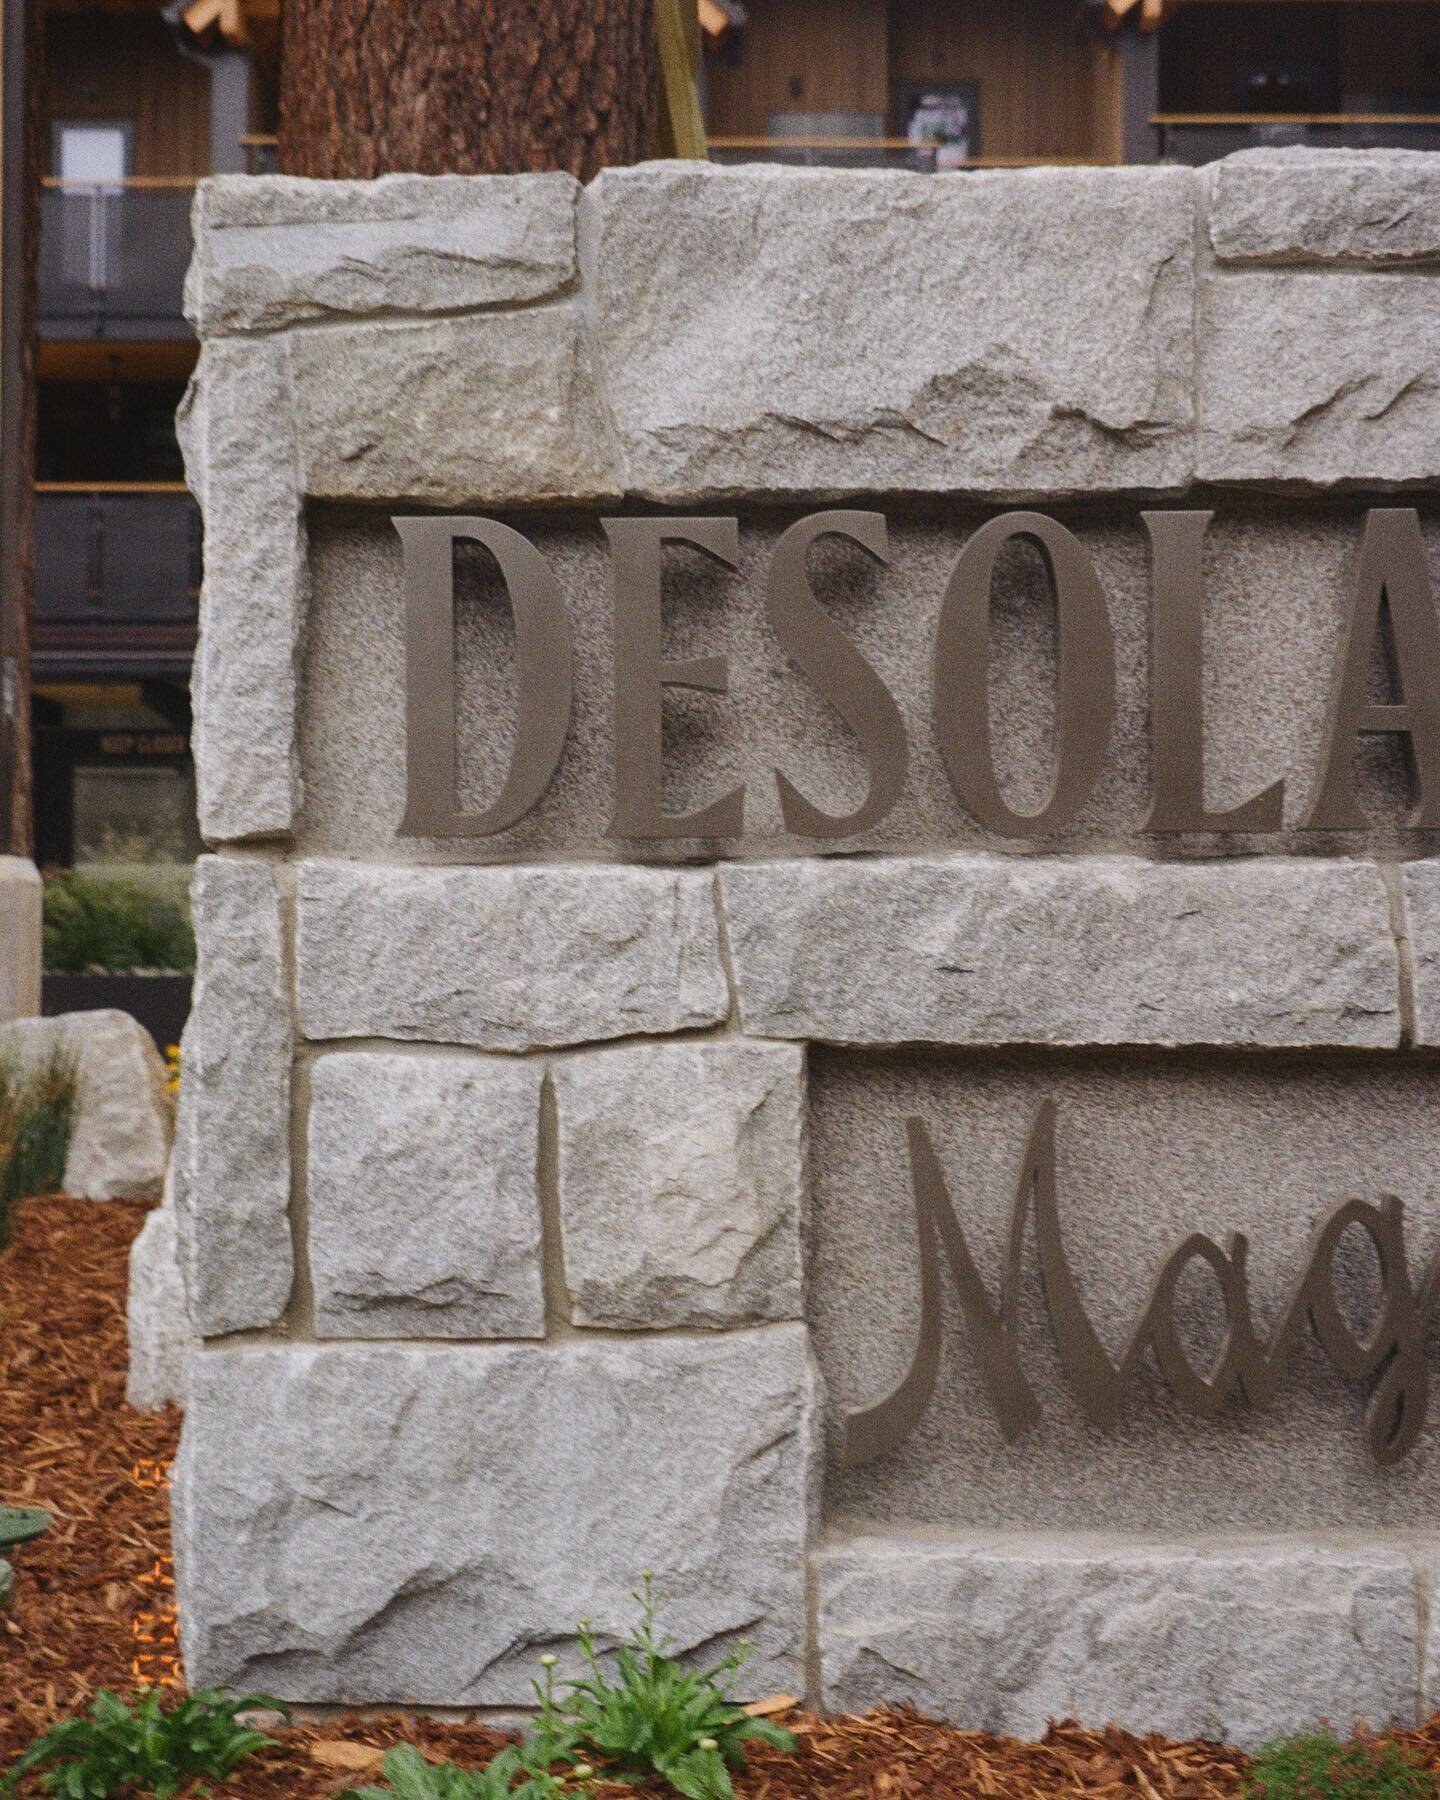 This sign saw many different iterations, but from the beginning it was clear that we wanted to incorporate stone native to the area. In this case, granite. 

The balance of natural elements and modern sign materials allowed this sign to mirror what t